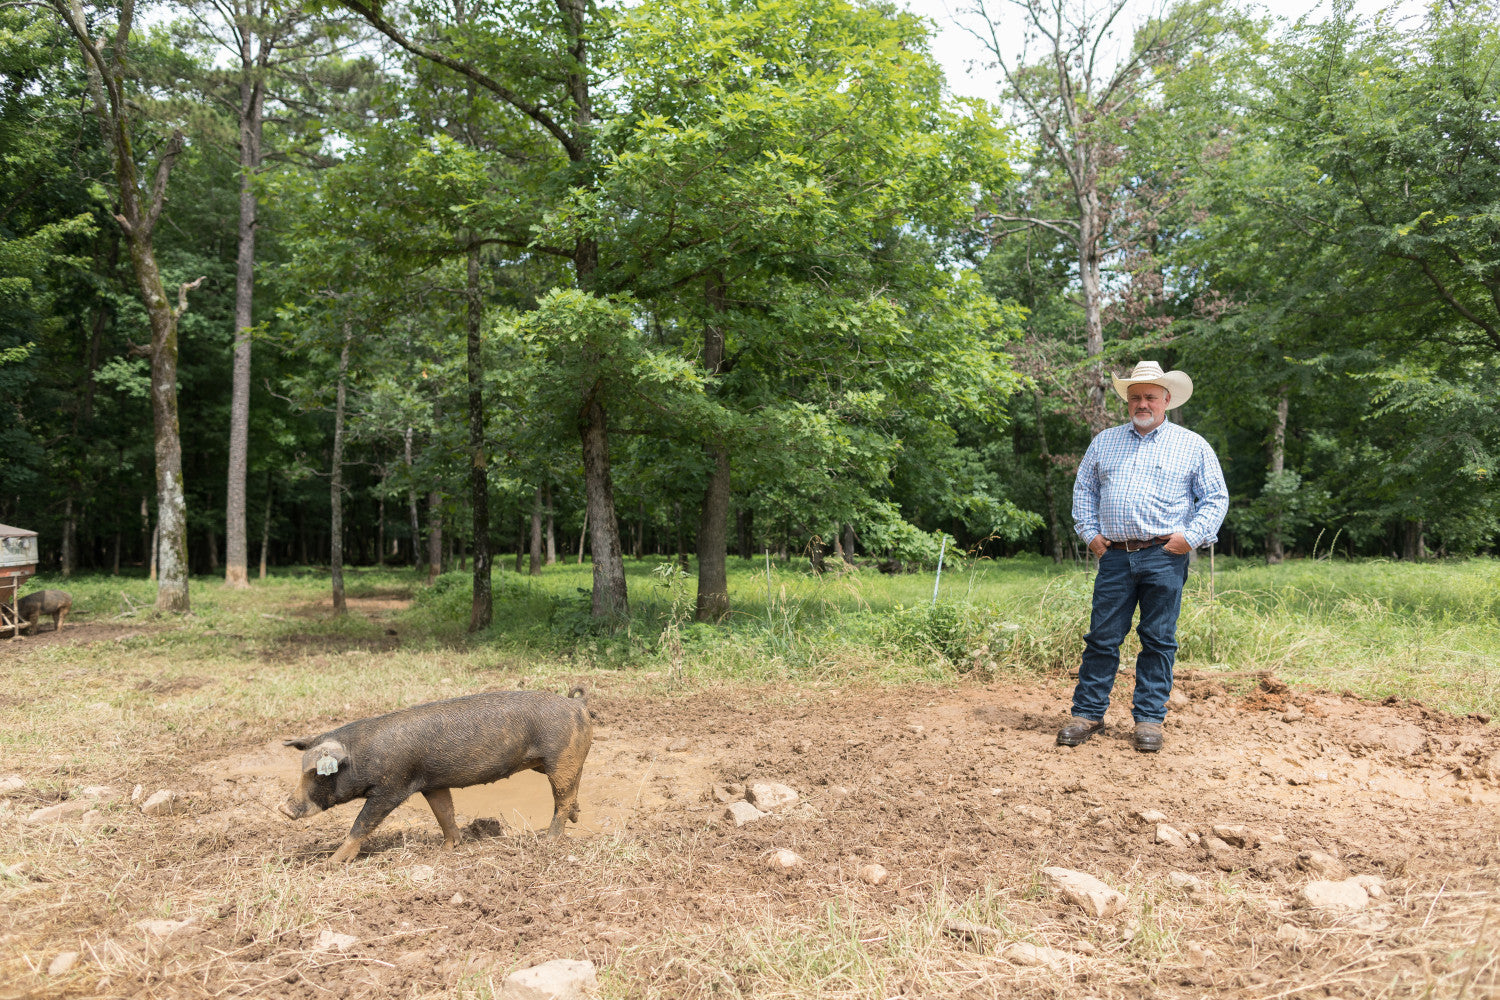 Real Talk - Lessons Farm Life Has Taught Me with Family Farmer Chris Ward